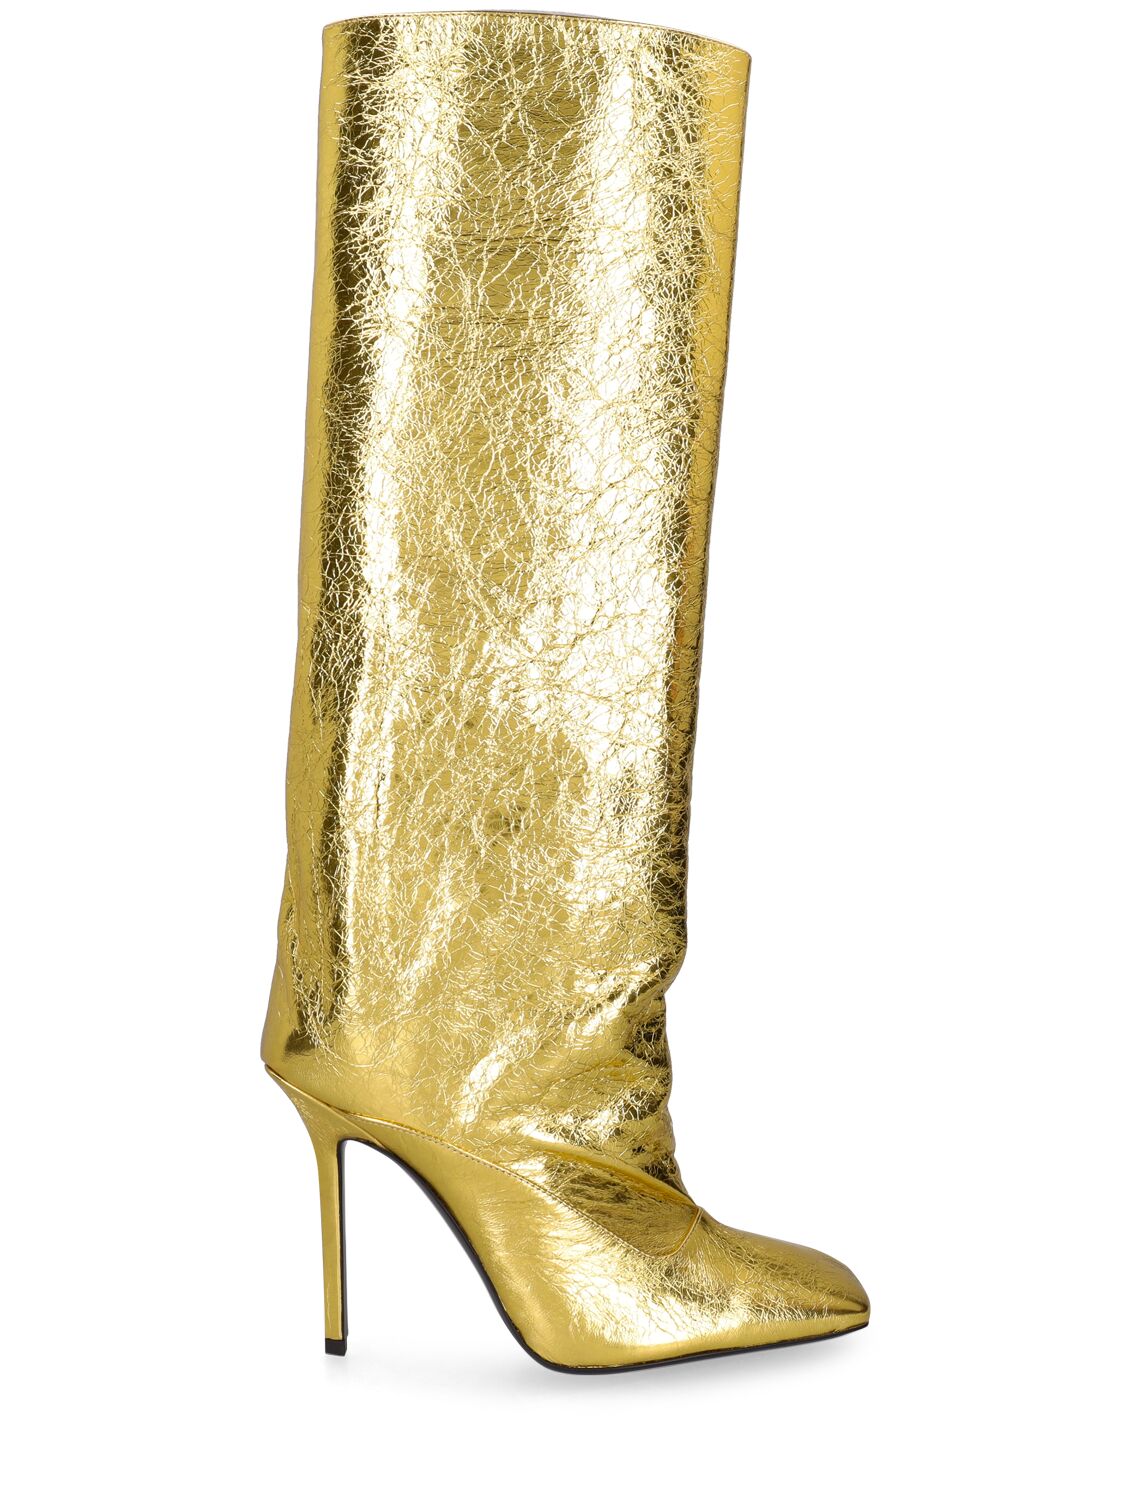 Attico 105mm Sienna Laminated Leather Tall Boot In Gold